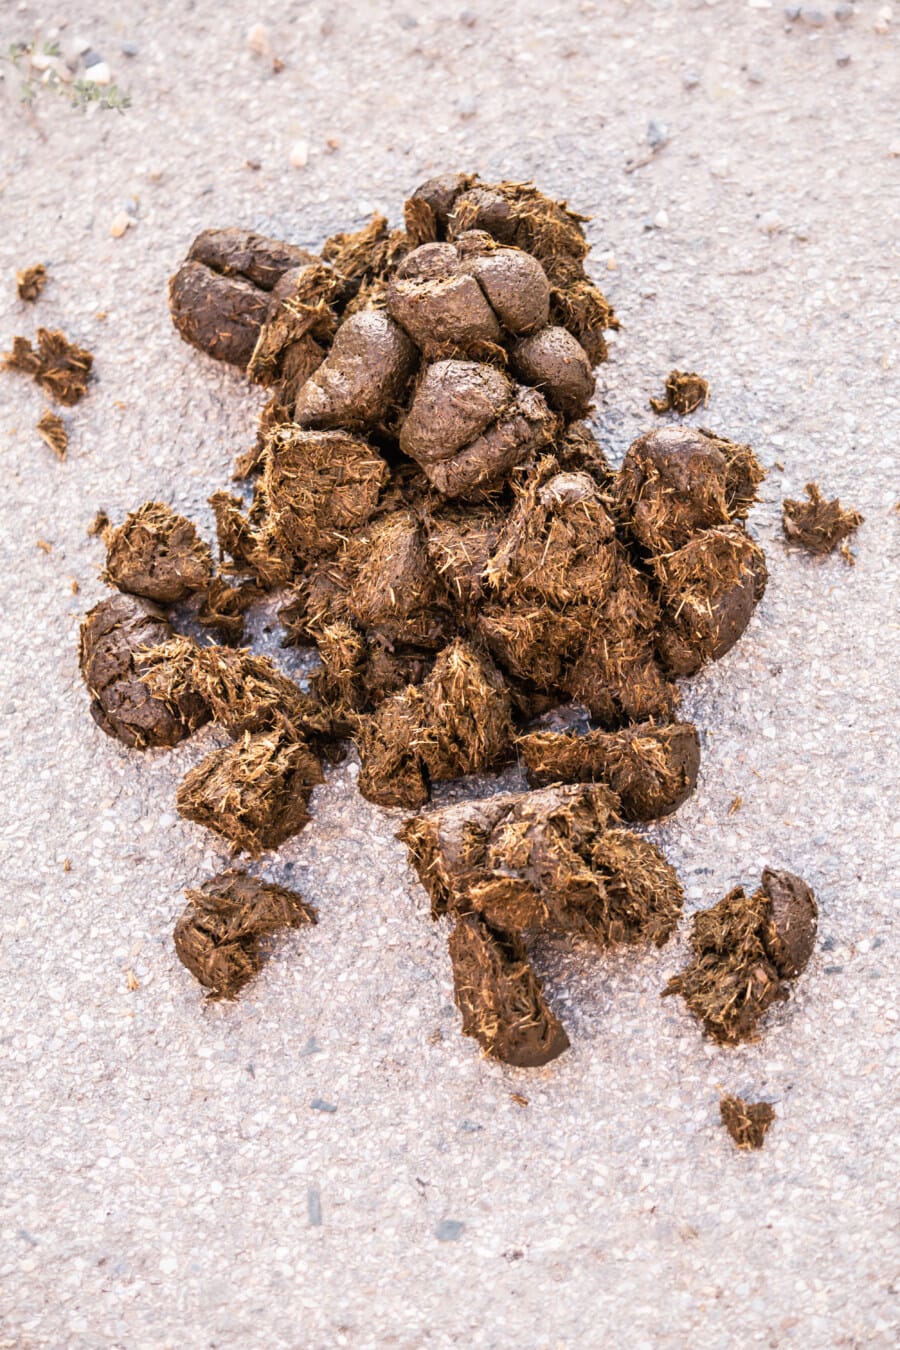 feces, excrement, pile, ground, dry, upclose, batch, brown, organic, close-up